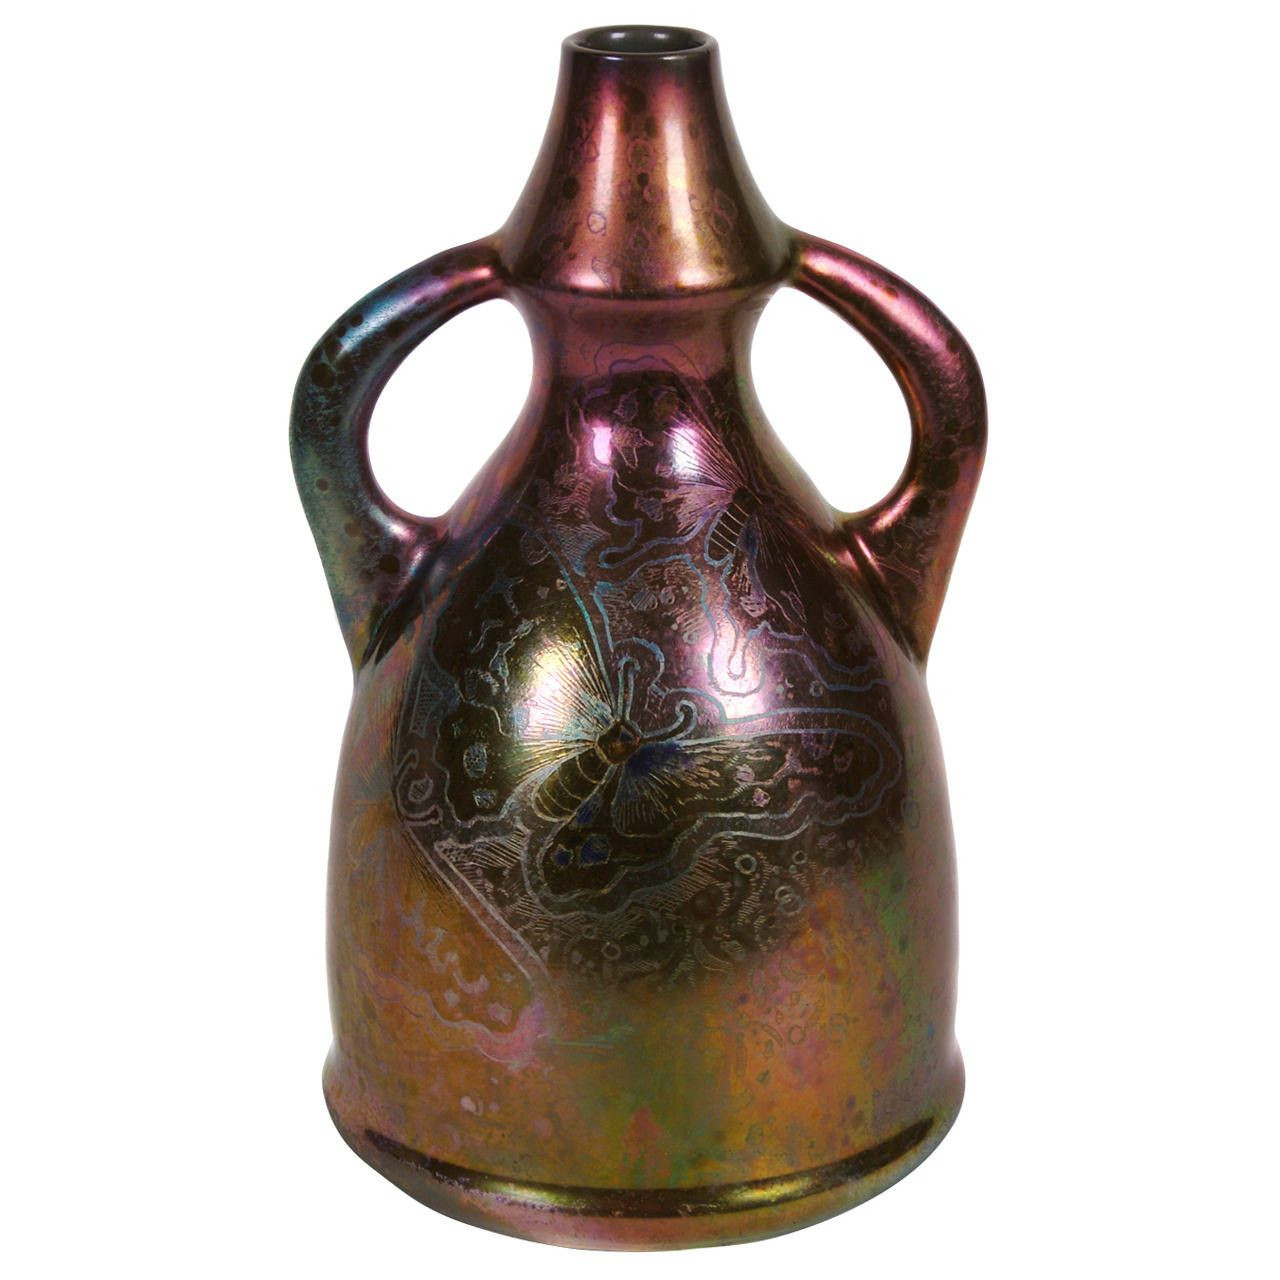 tiffany vases for sale of french art nouveau period ceramic vessel by frederic danton circa regarding for sale on french art nouveau period two handled ceramic vessel by frederic danton circa wonderful iridescent glaze with butterfly motif